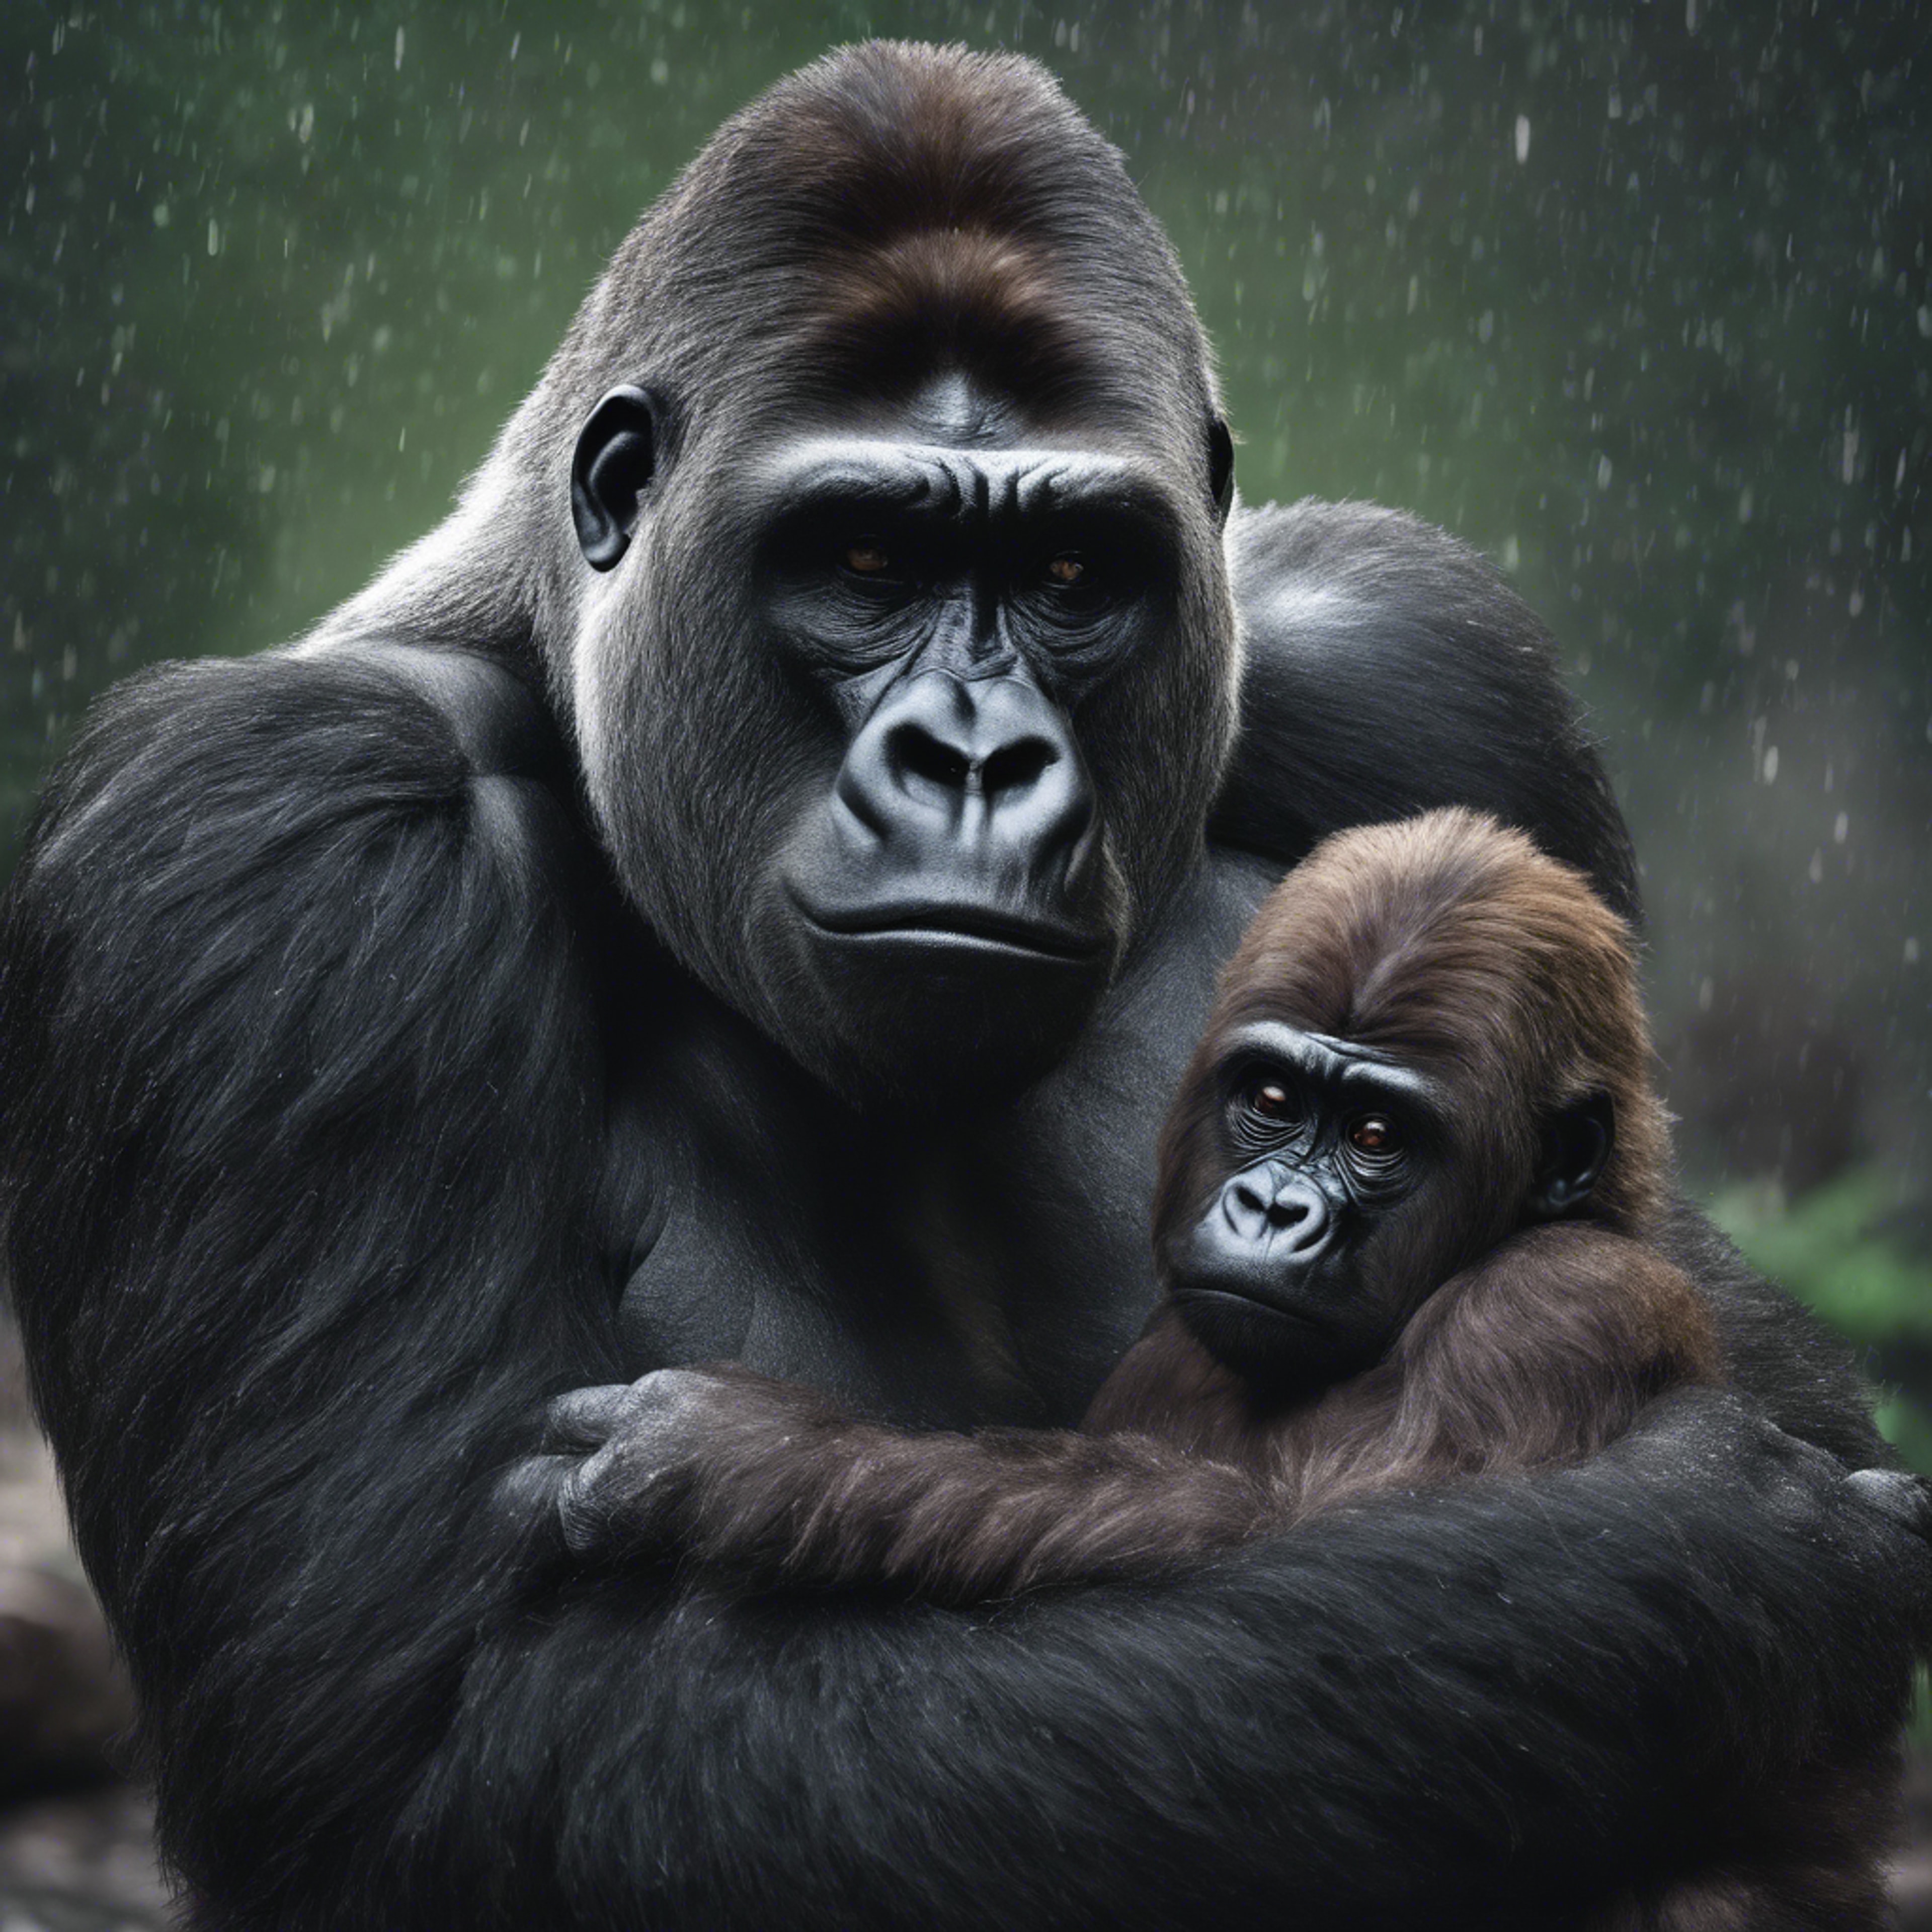 A soft, sensitive study of a gorilla father gently comforting his scared offspring during a thunderstorm. Kertas dinding[6d897e1fa87d4d60b202]